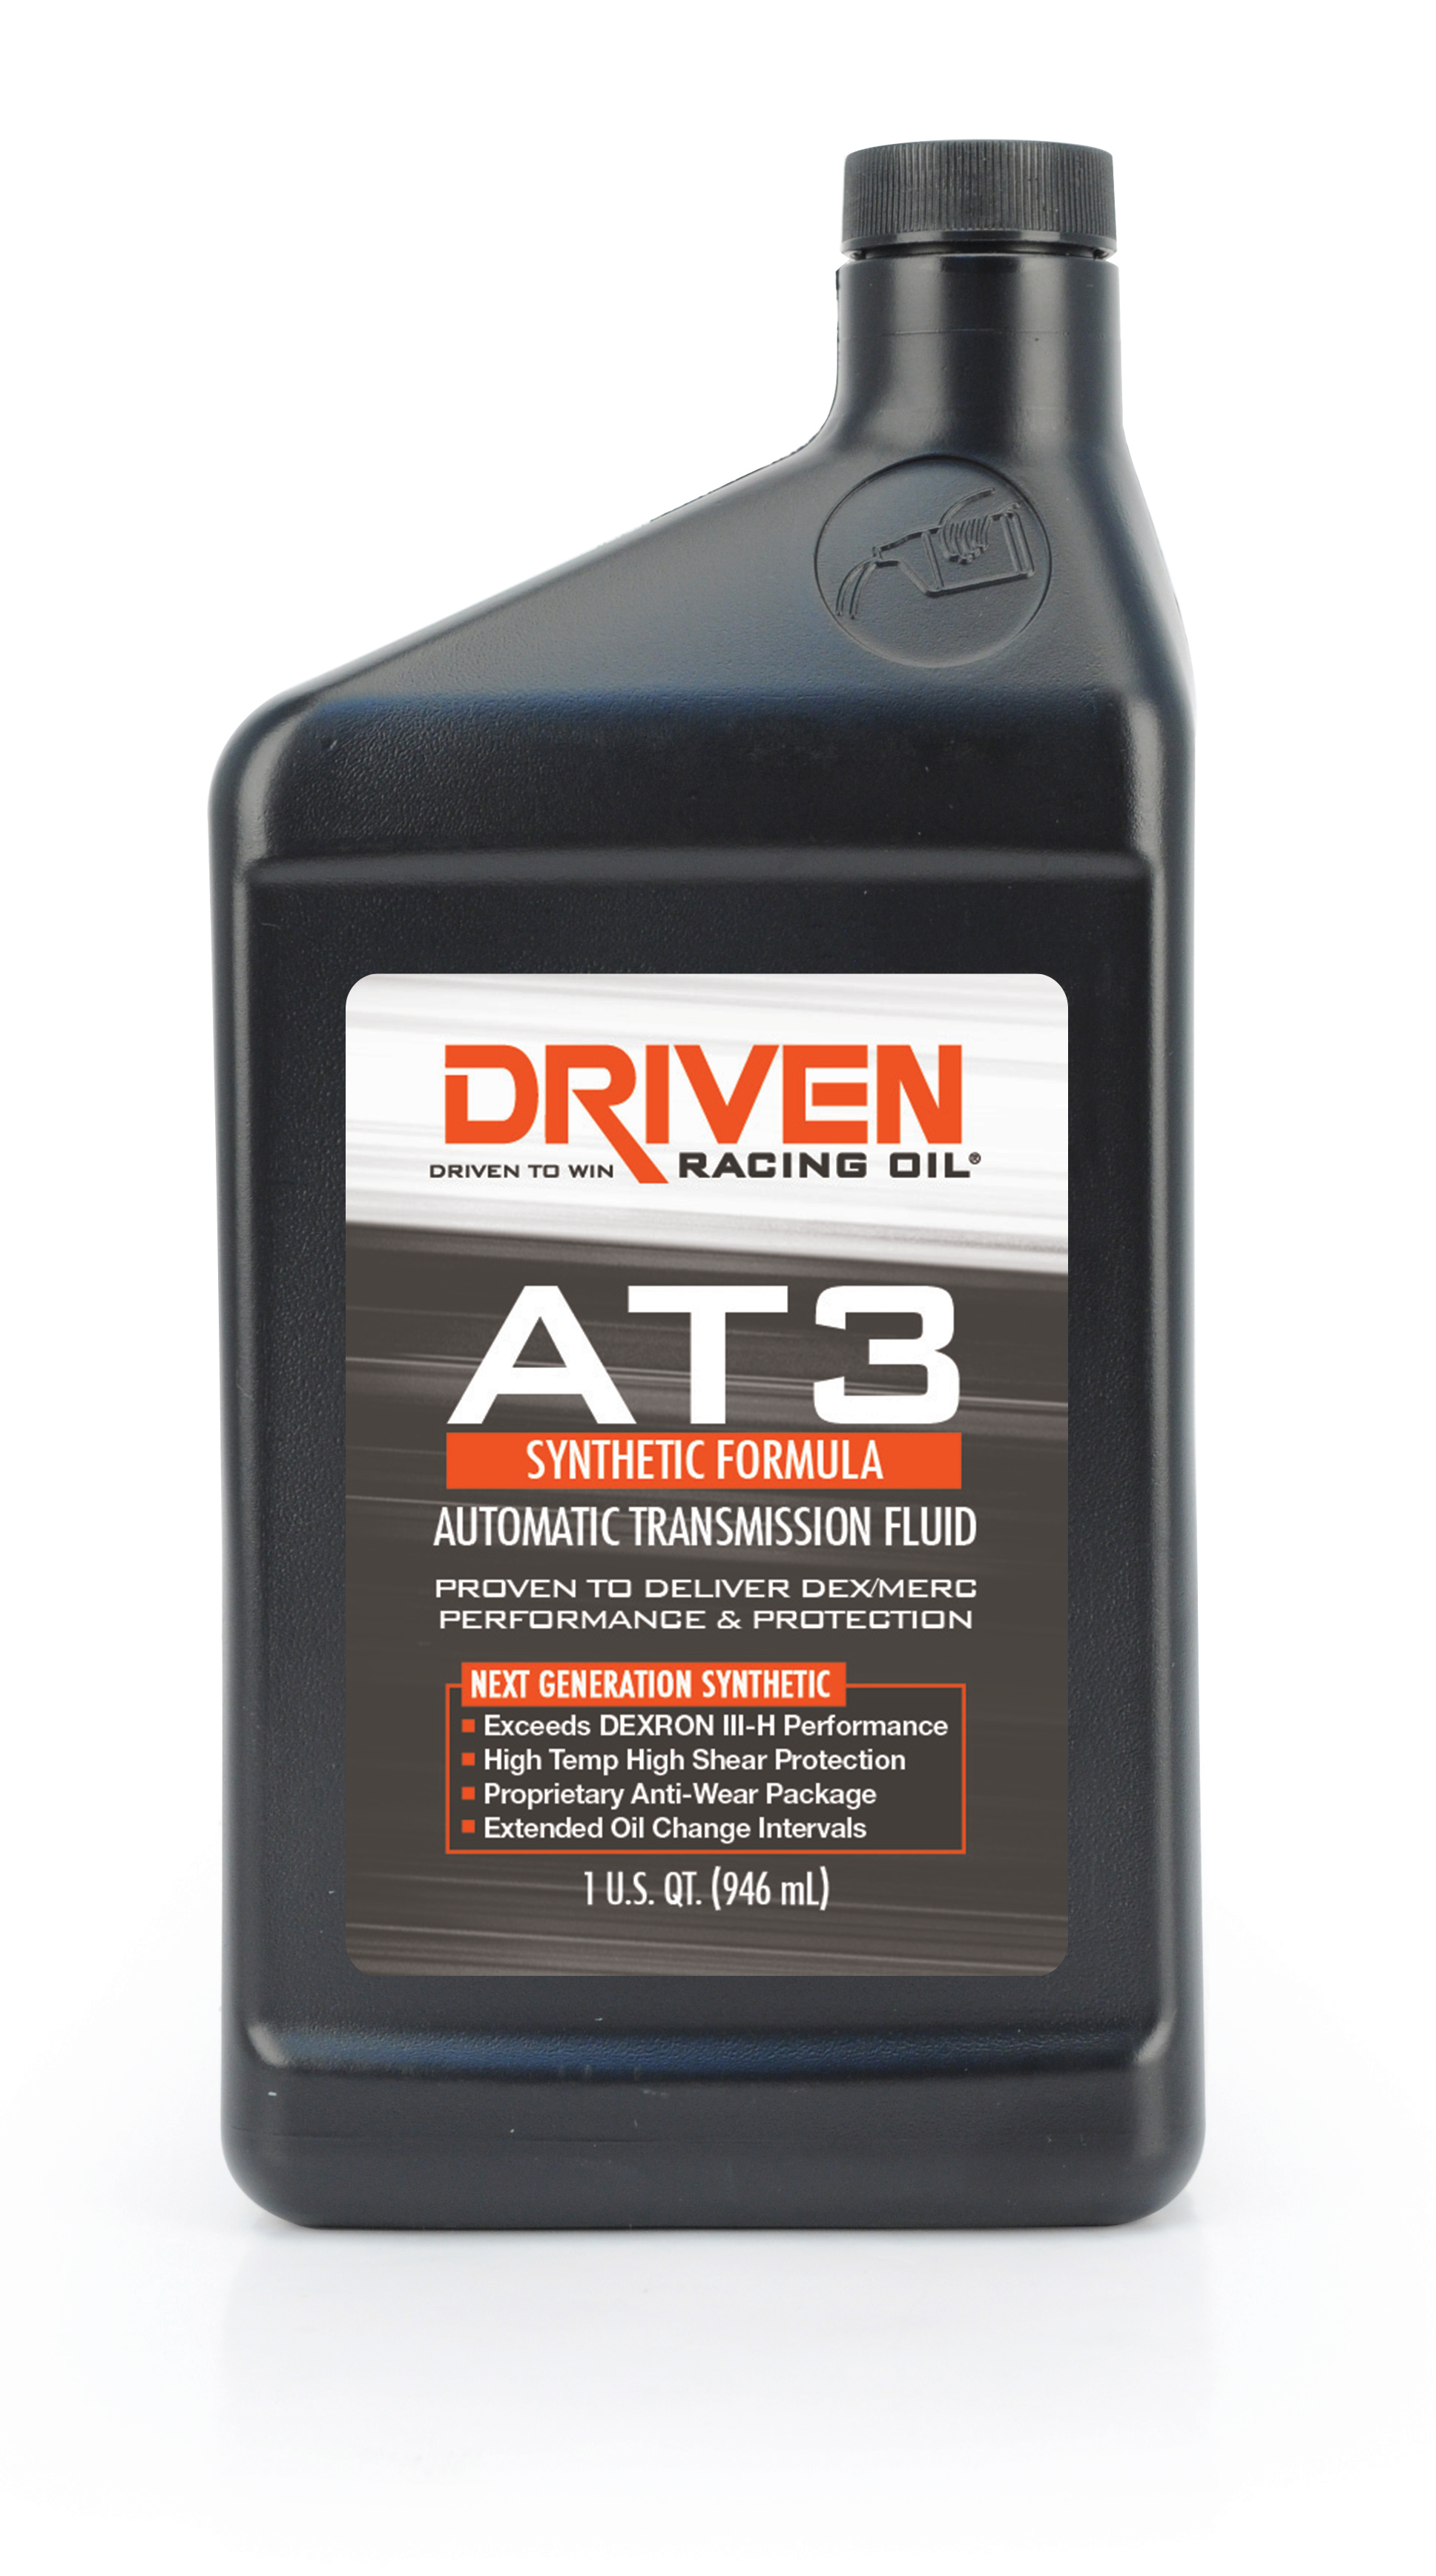 Driven Oil 04706 Transmission Fluid, AT3, Automatic, Synthetic, 1 qt Bottle, Each